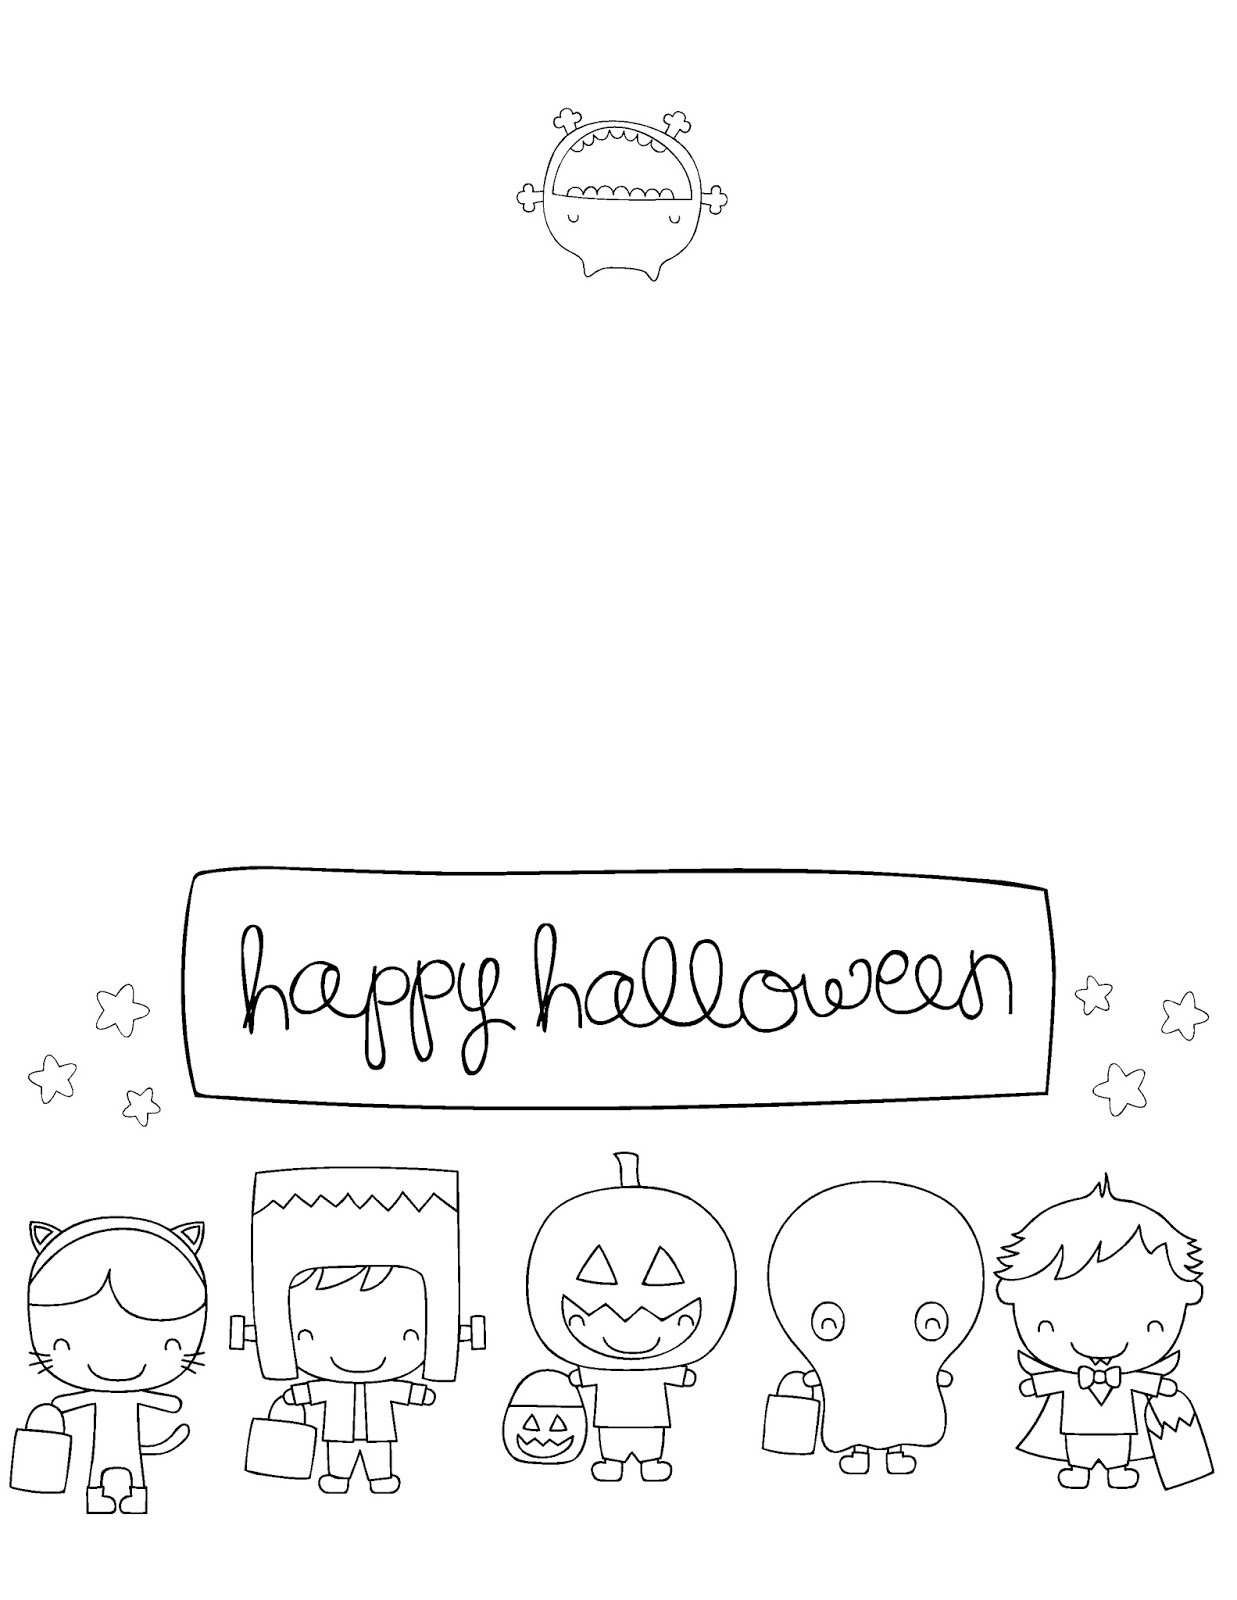 Printable Halloween Cards To Color For Free | Download Them Or Print - Printable Halloween Cards To Color For Free